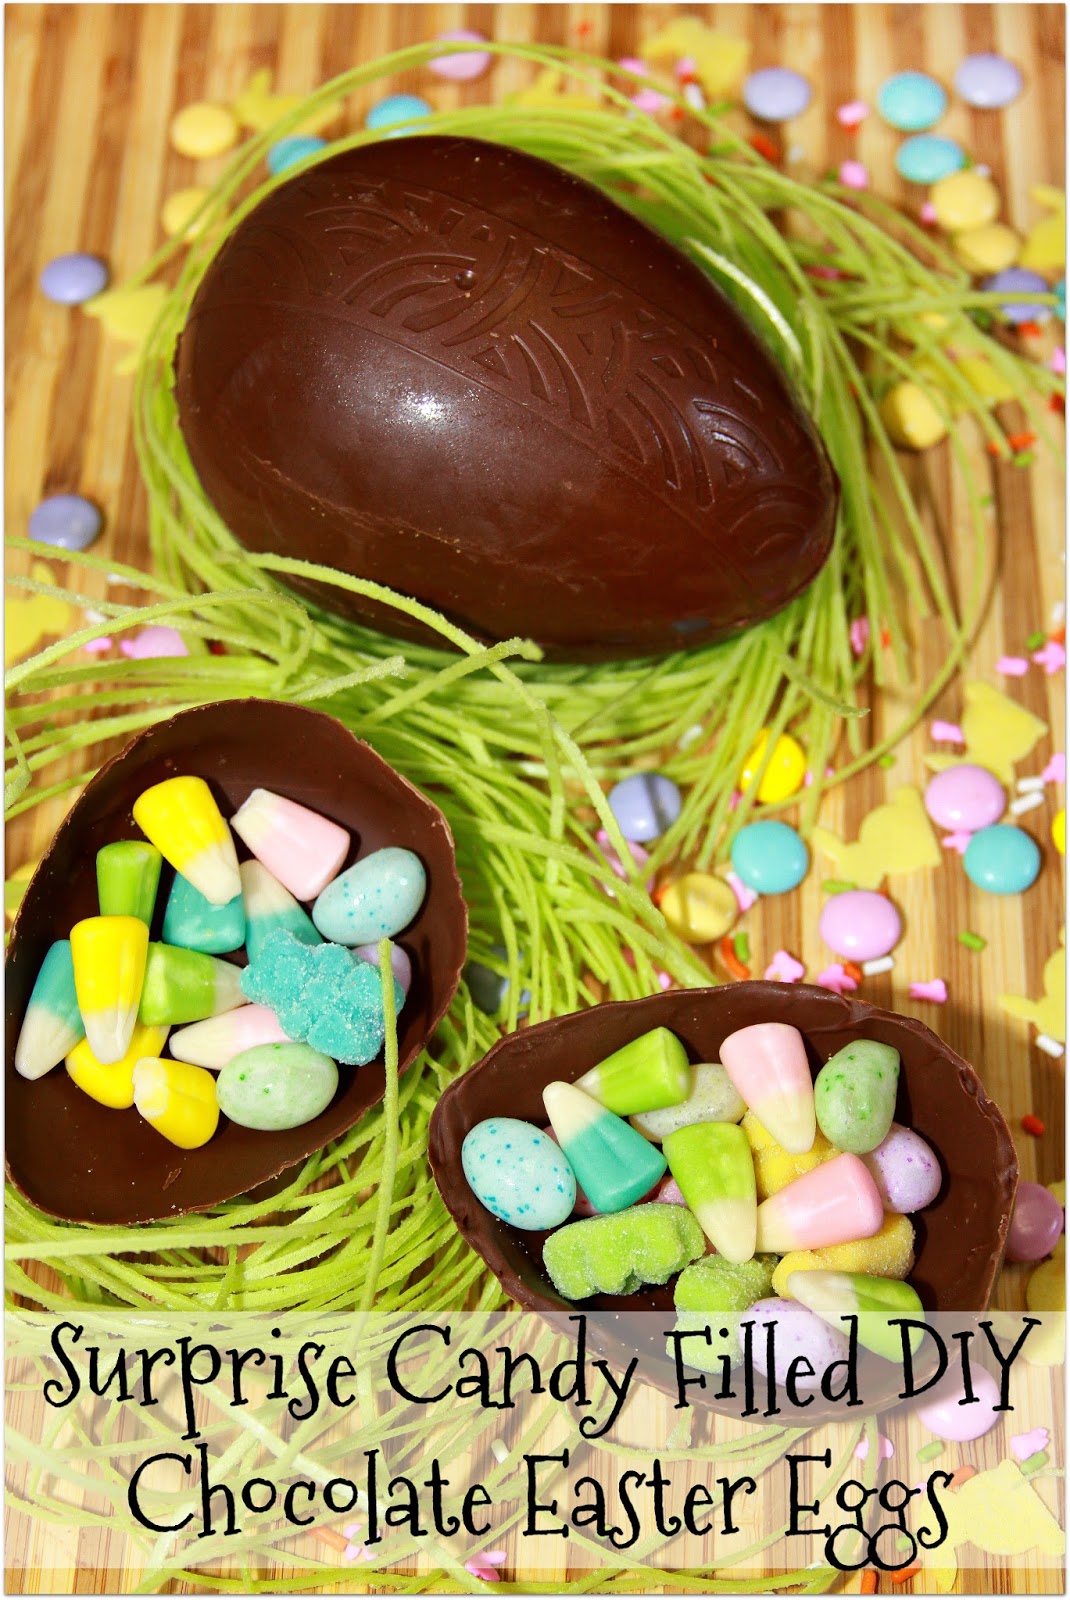 Surprise Egg Chocolate Eggs Tasty Food Sweet Shiny Natural